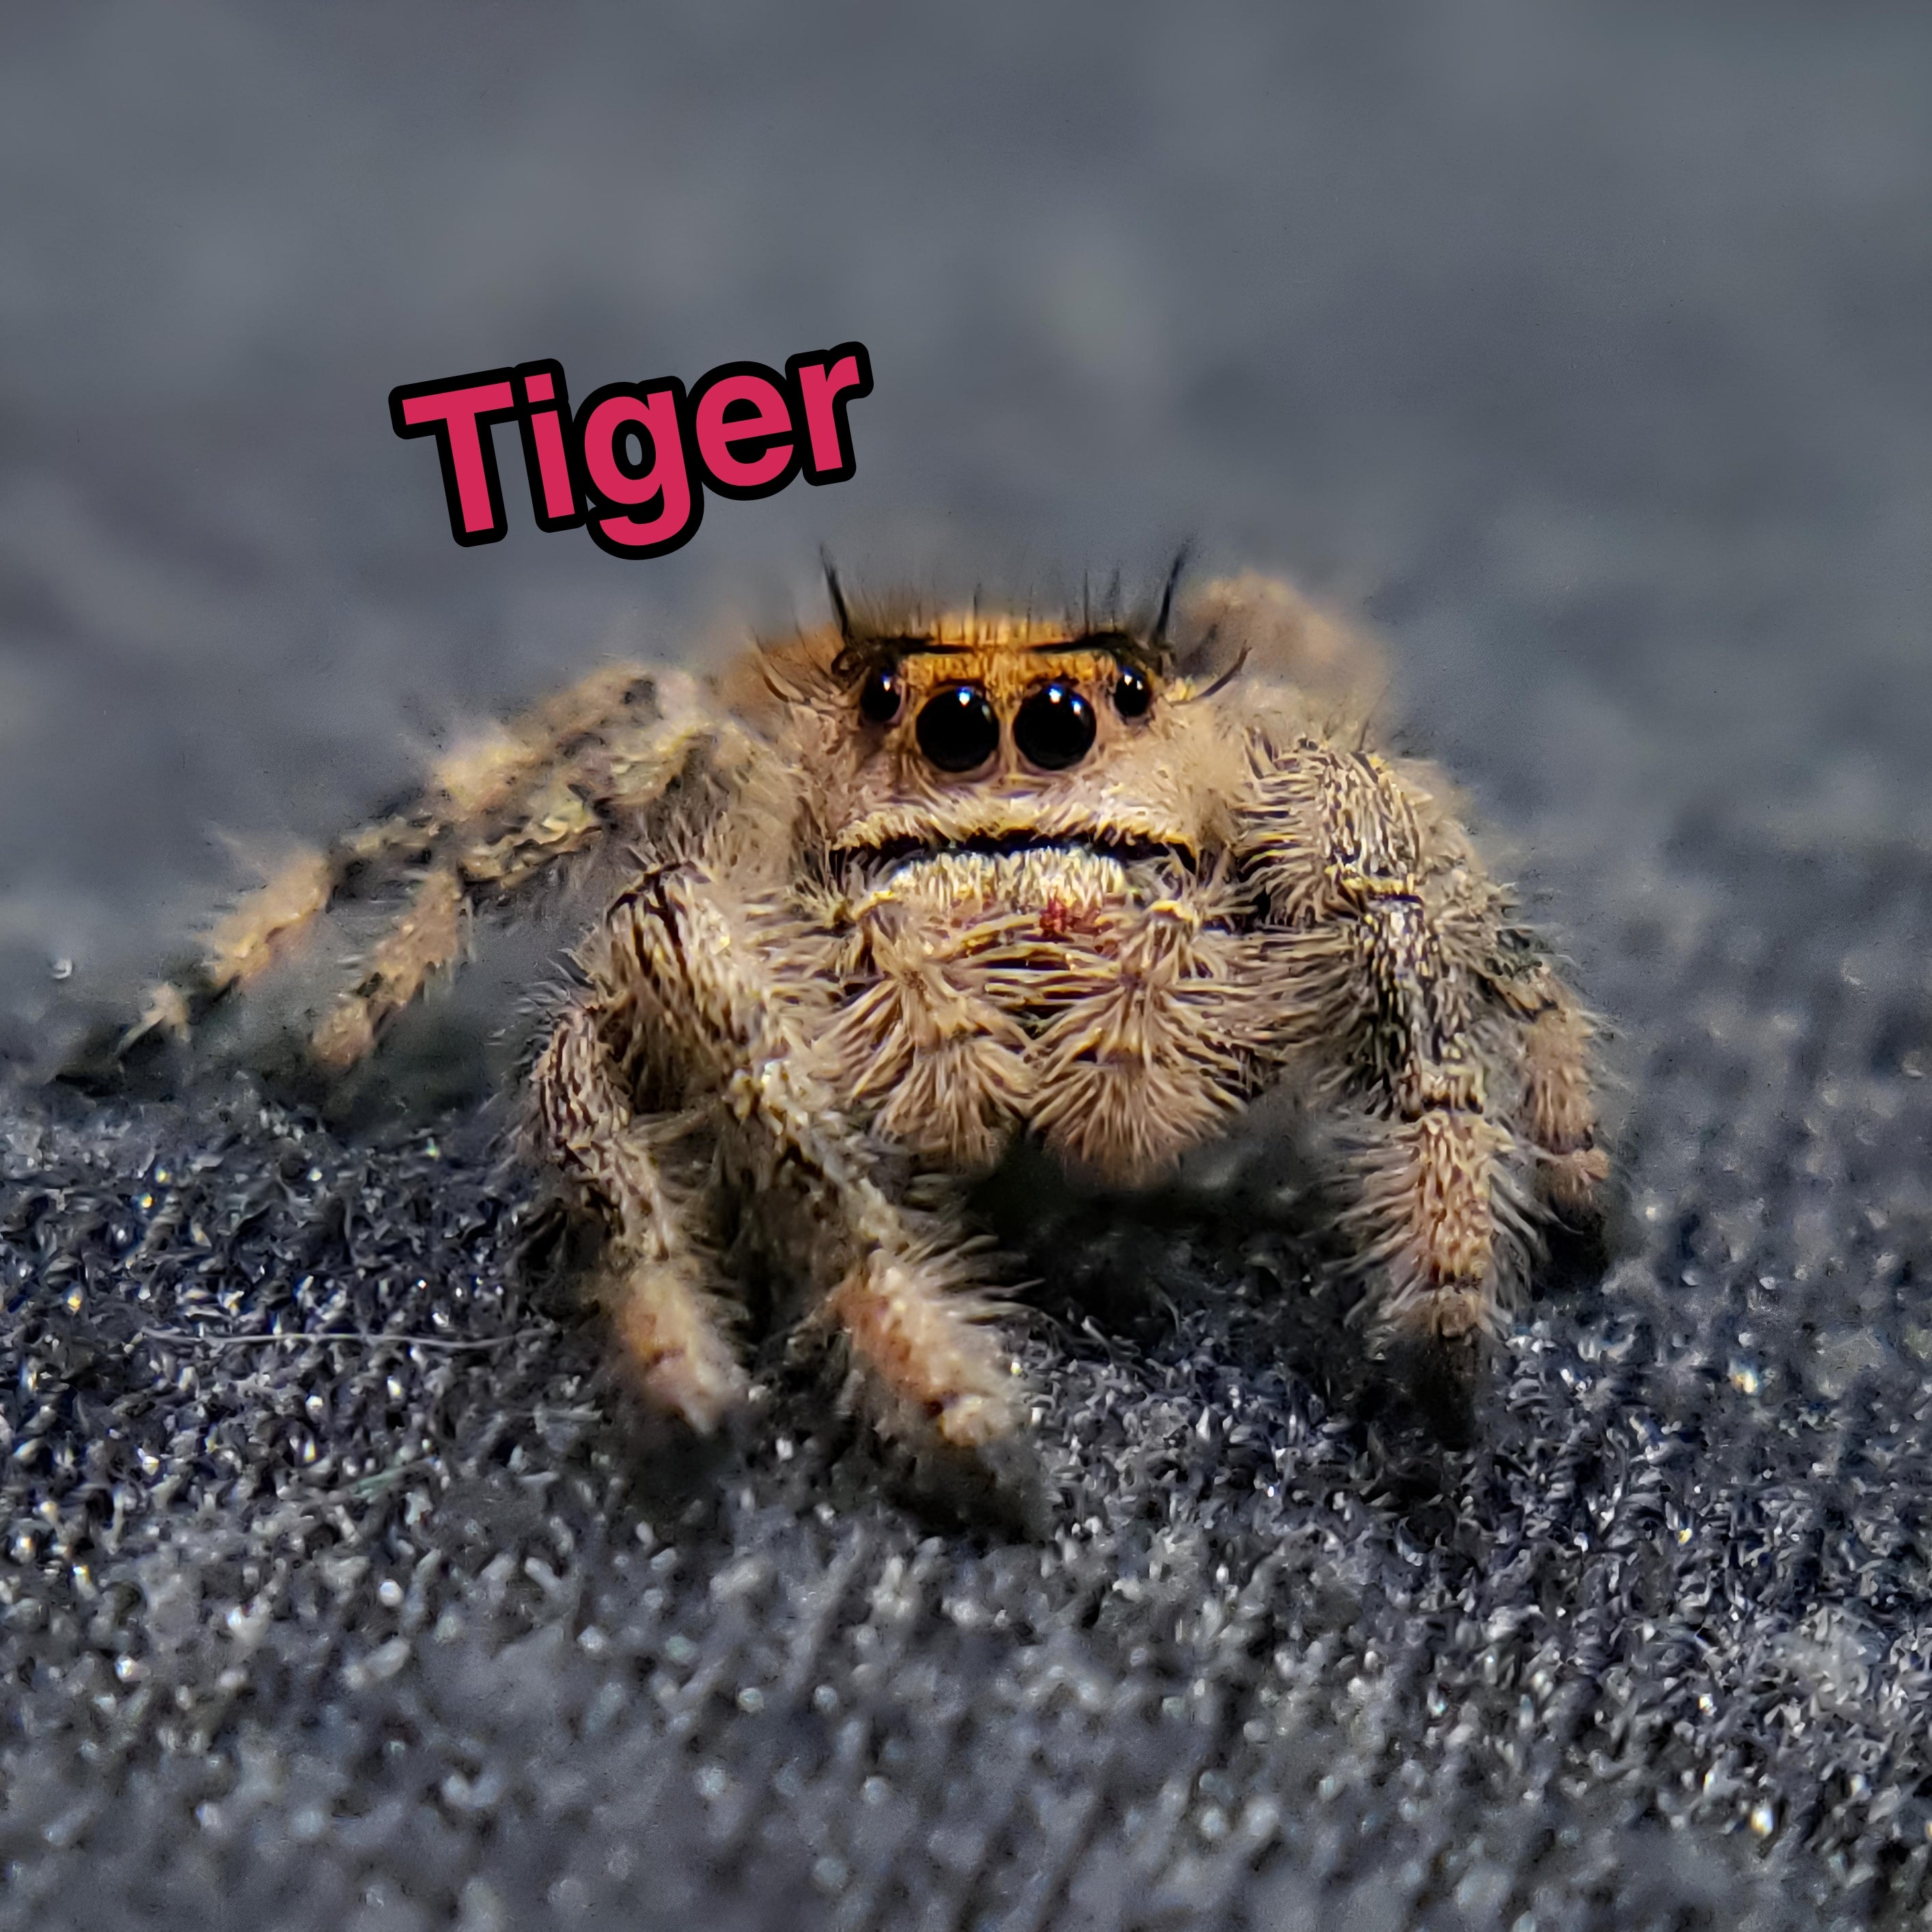 Jumping Spider For Sale, Tiger, Salticidae